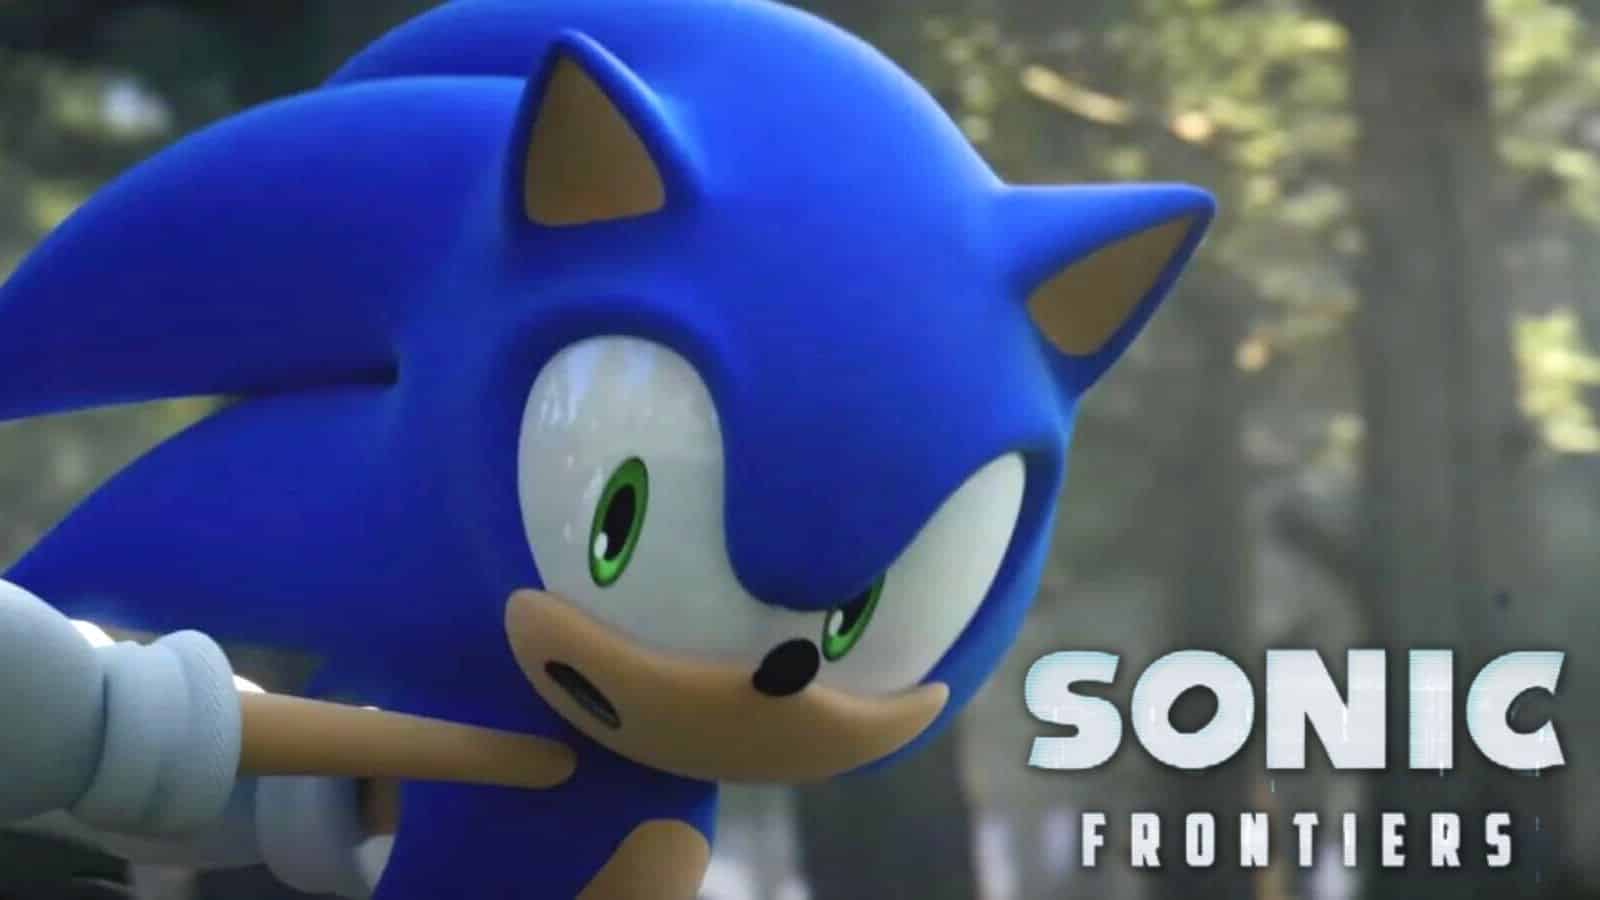 Sonic Frontiers story trailer